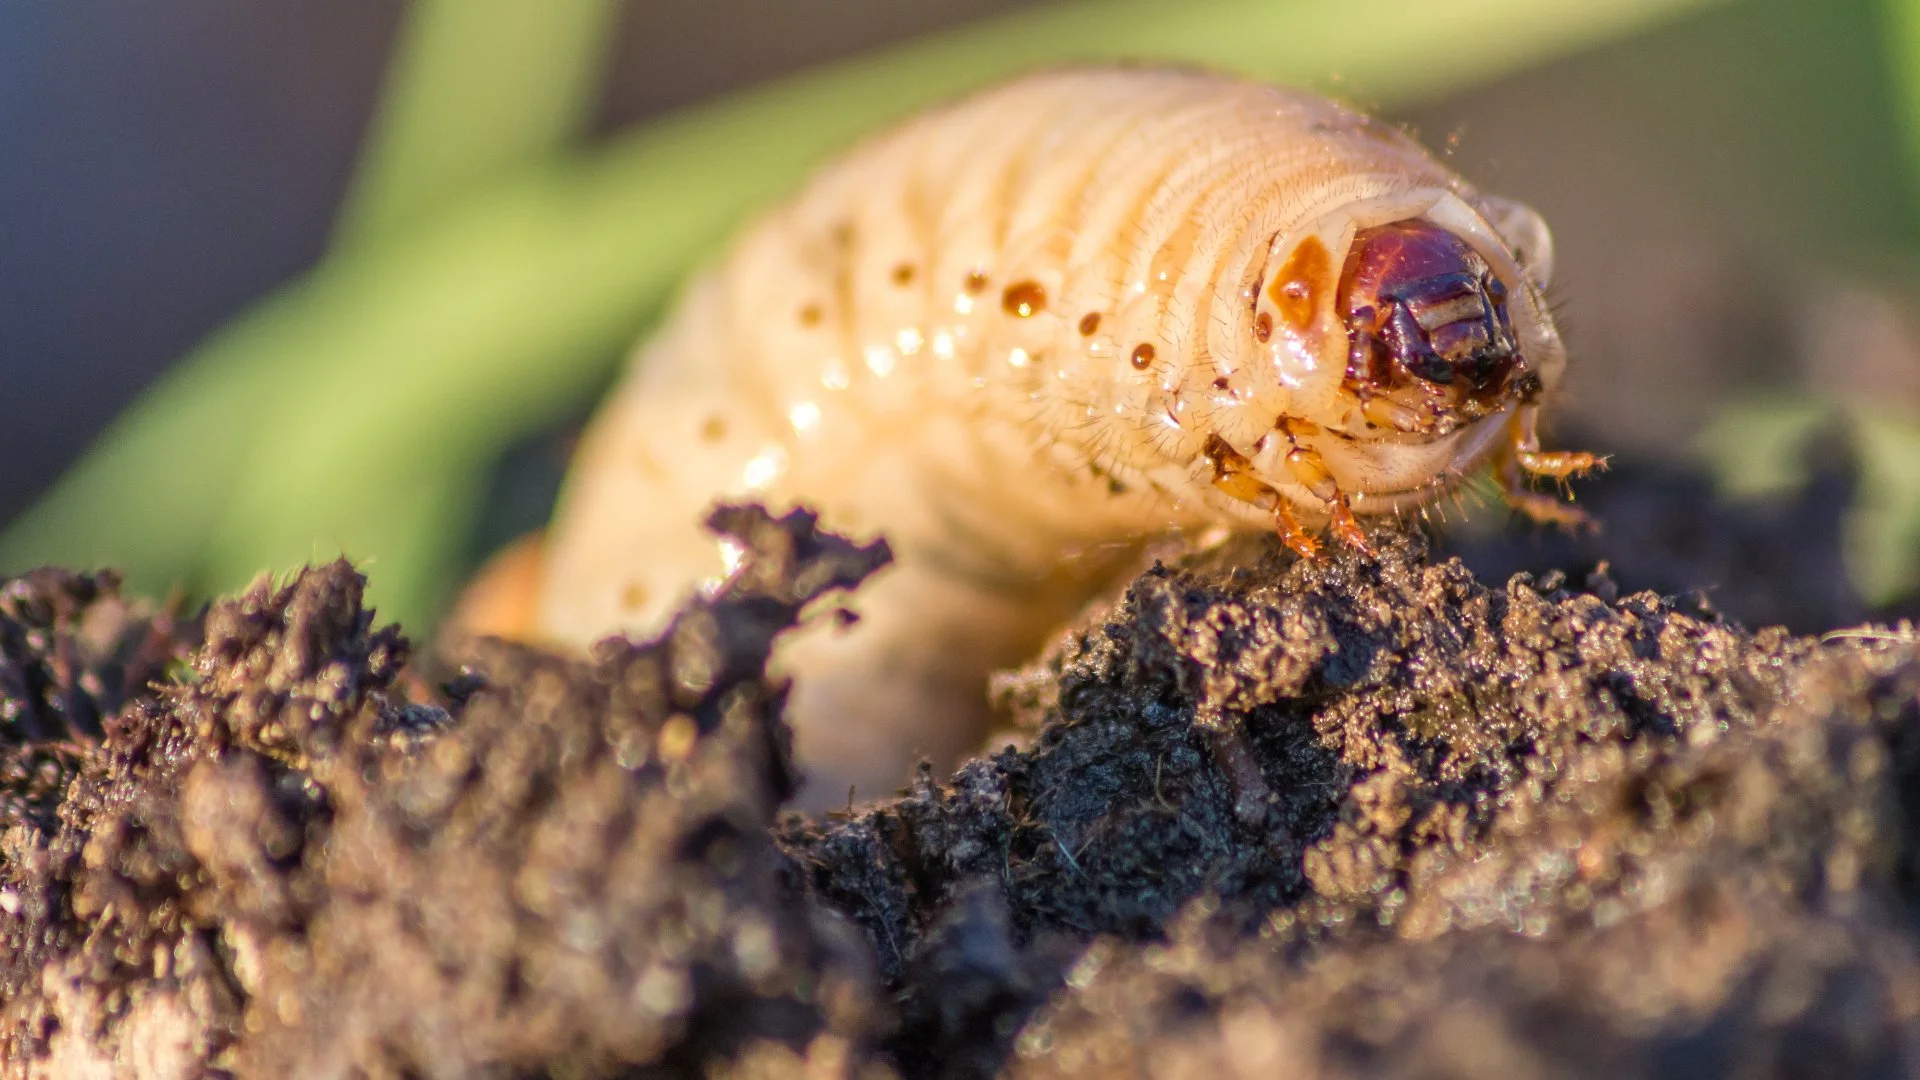 Grubs Might Be Turning Your Lawn Into a Meal - Look Out for These Signs